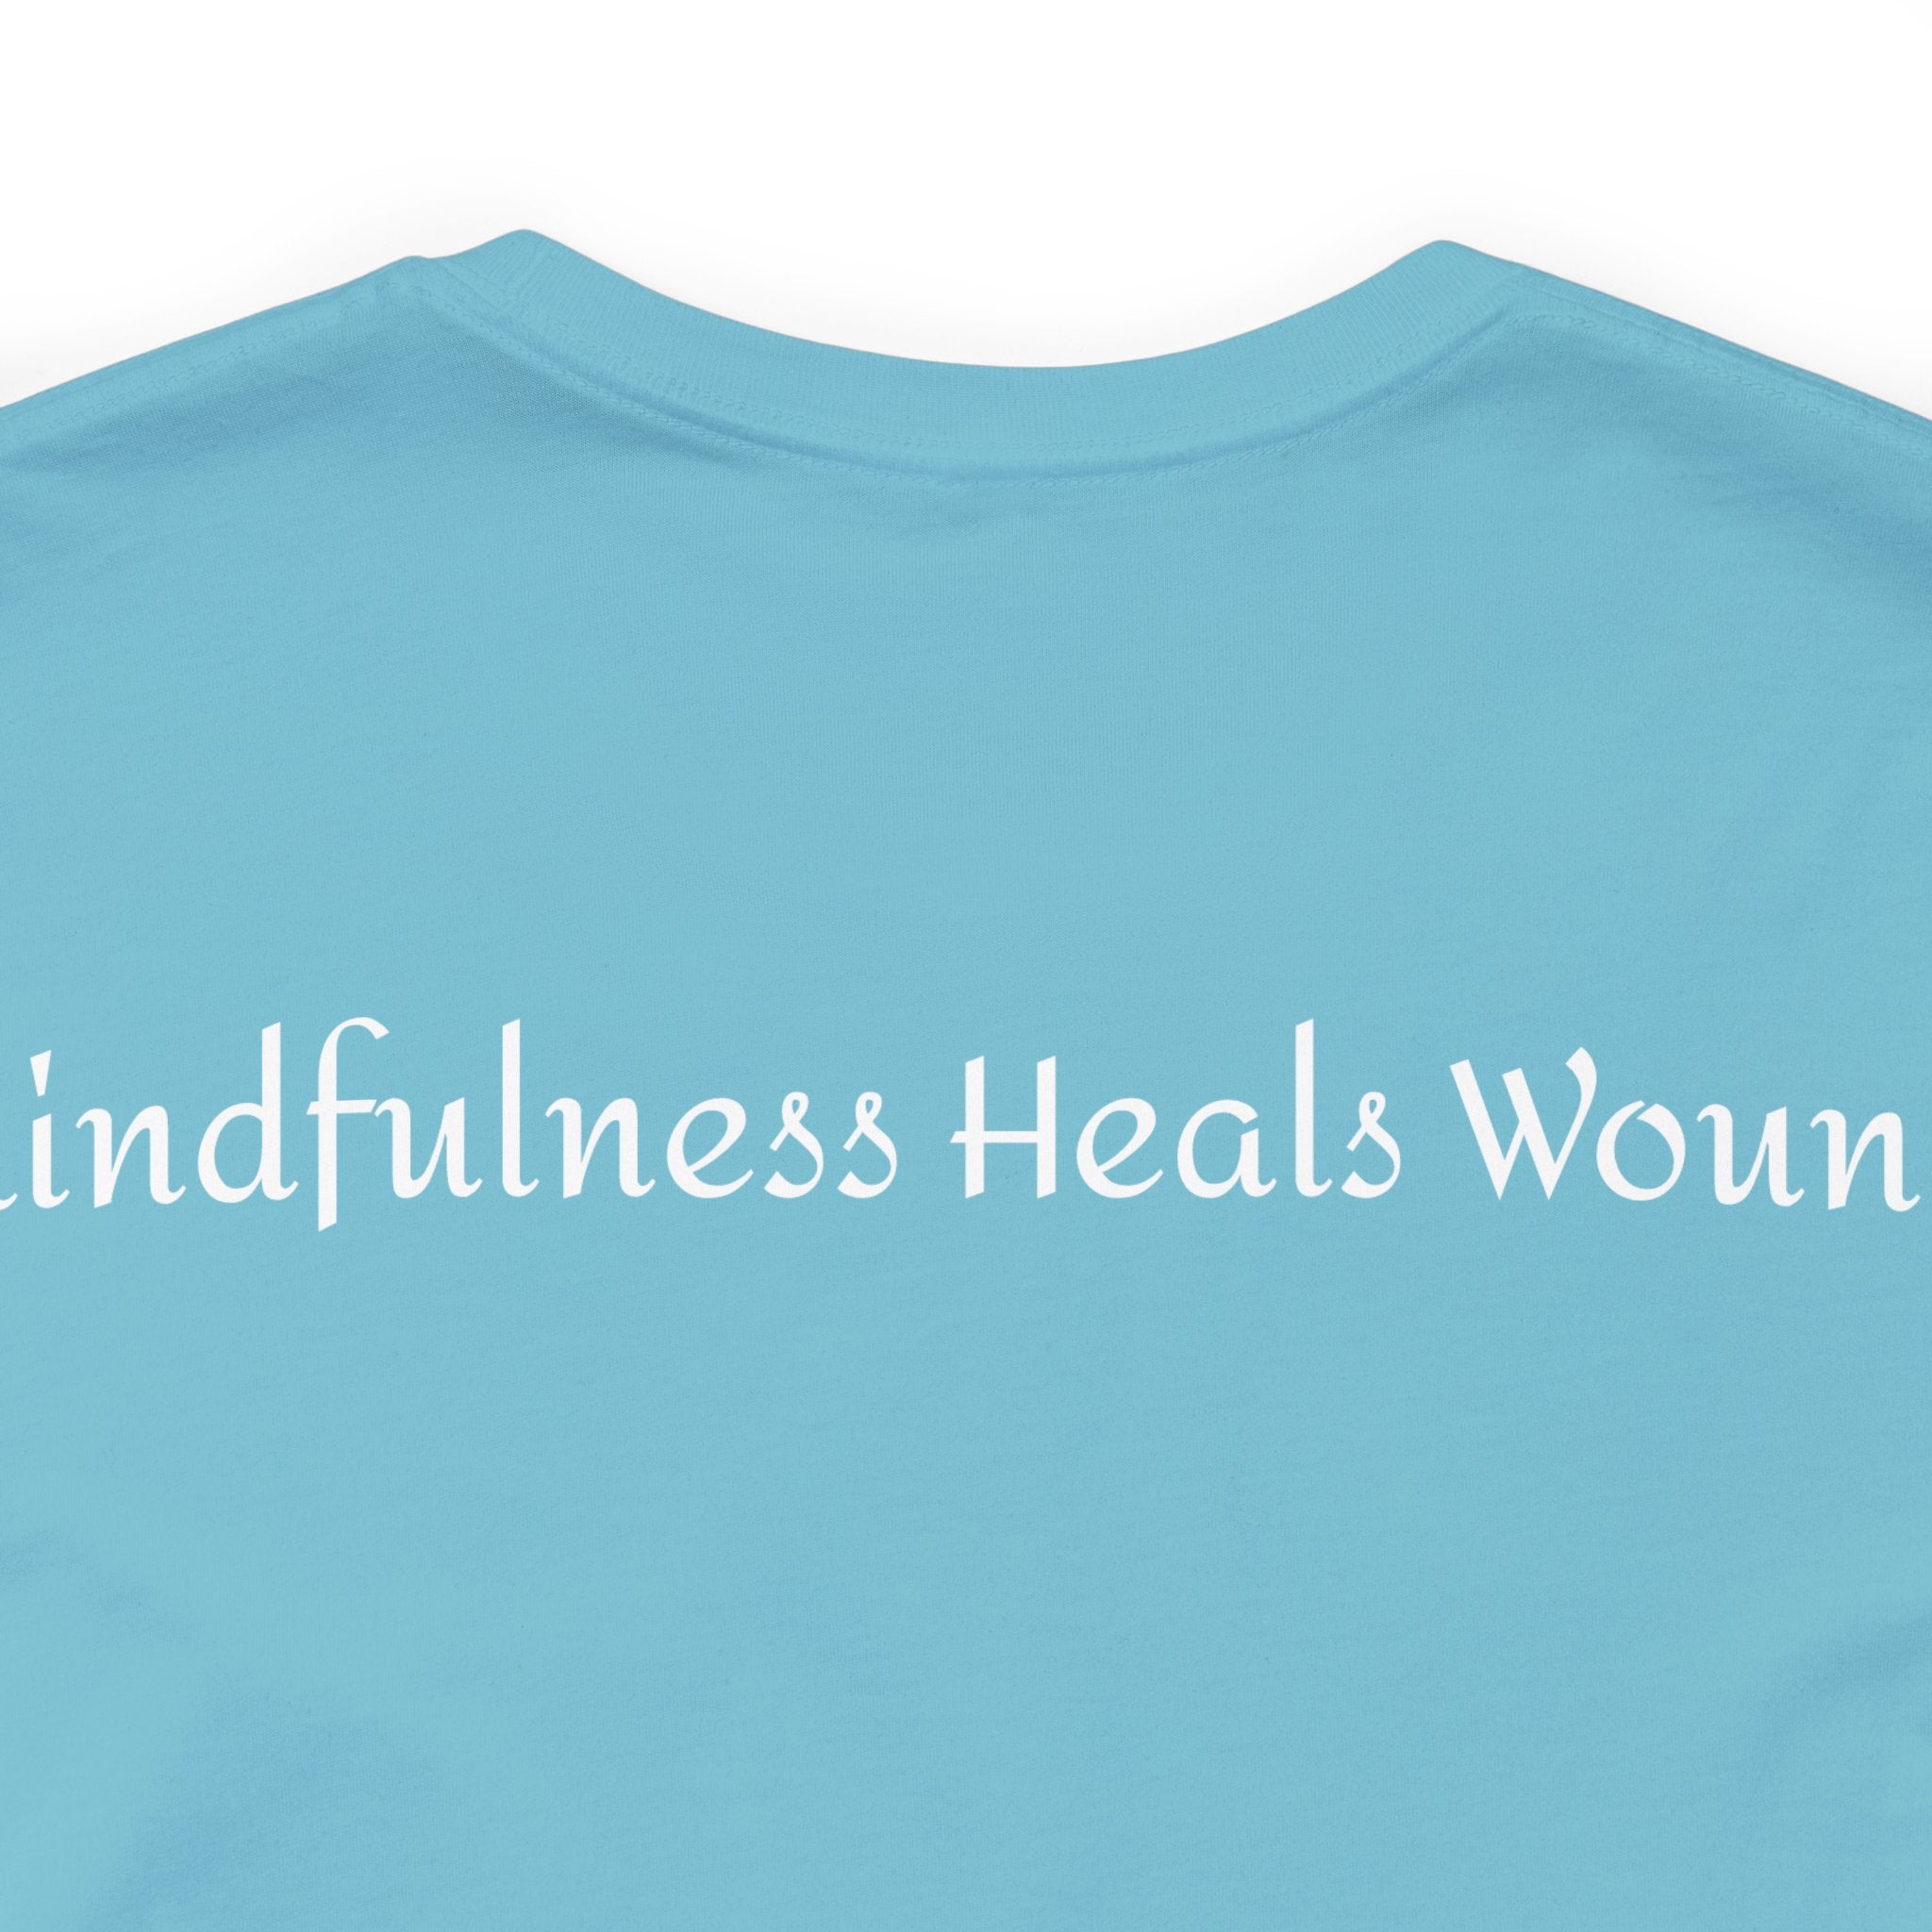 Mindfulness Heals Wounds Tee - Bella+Canvas 3001 Turquoise Airlume Cotton Bella+Canvas 3001 Crew Neckline Jersey Short Sleeve Lightweight Fabric Mental Health Support Retail Fit Tear-away Label Tee Unisex Tee T-Shirt 8141166184371823793_2048 Printify